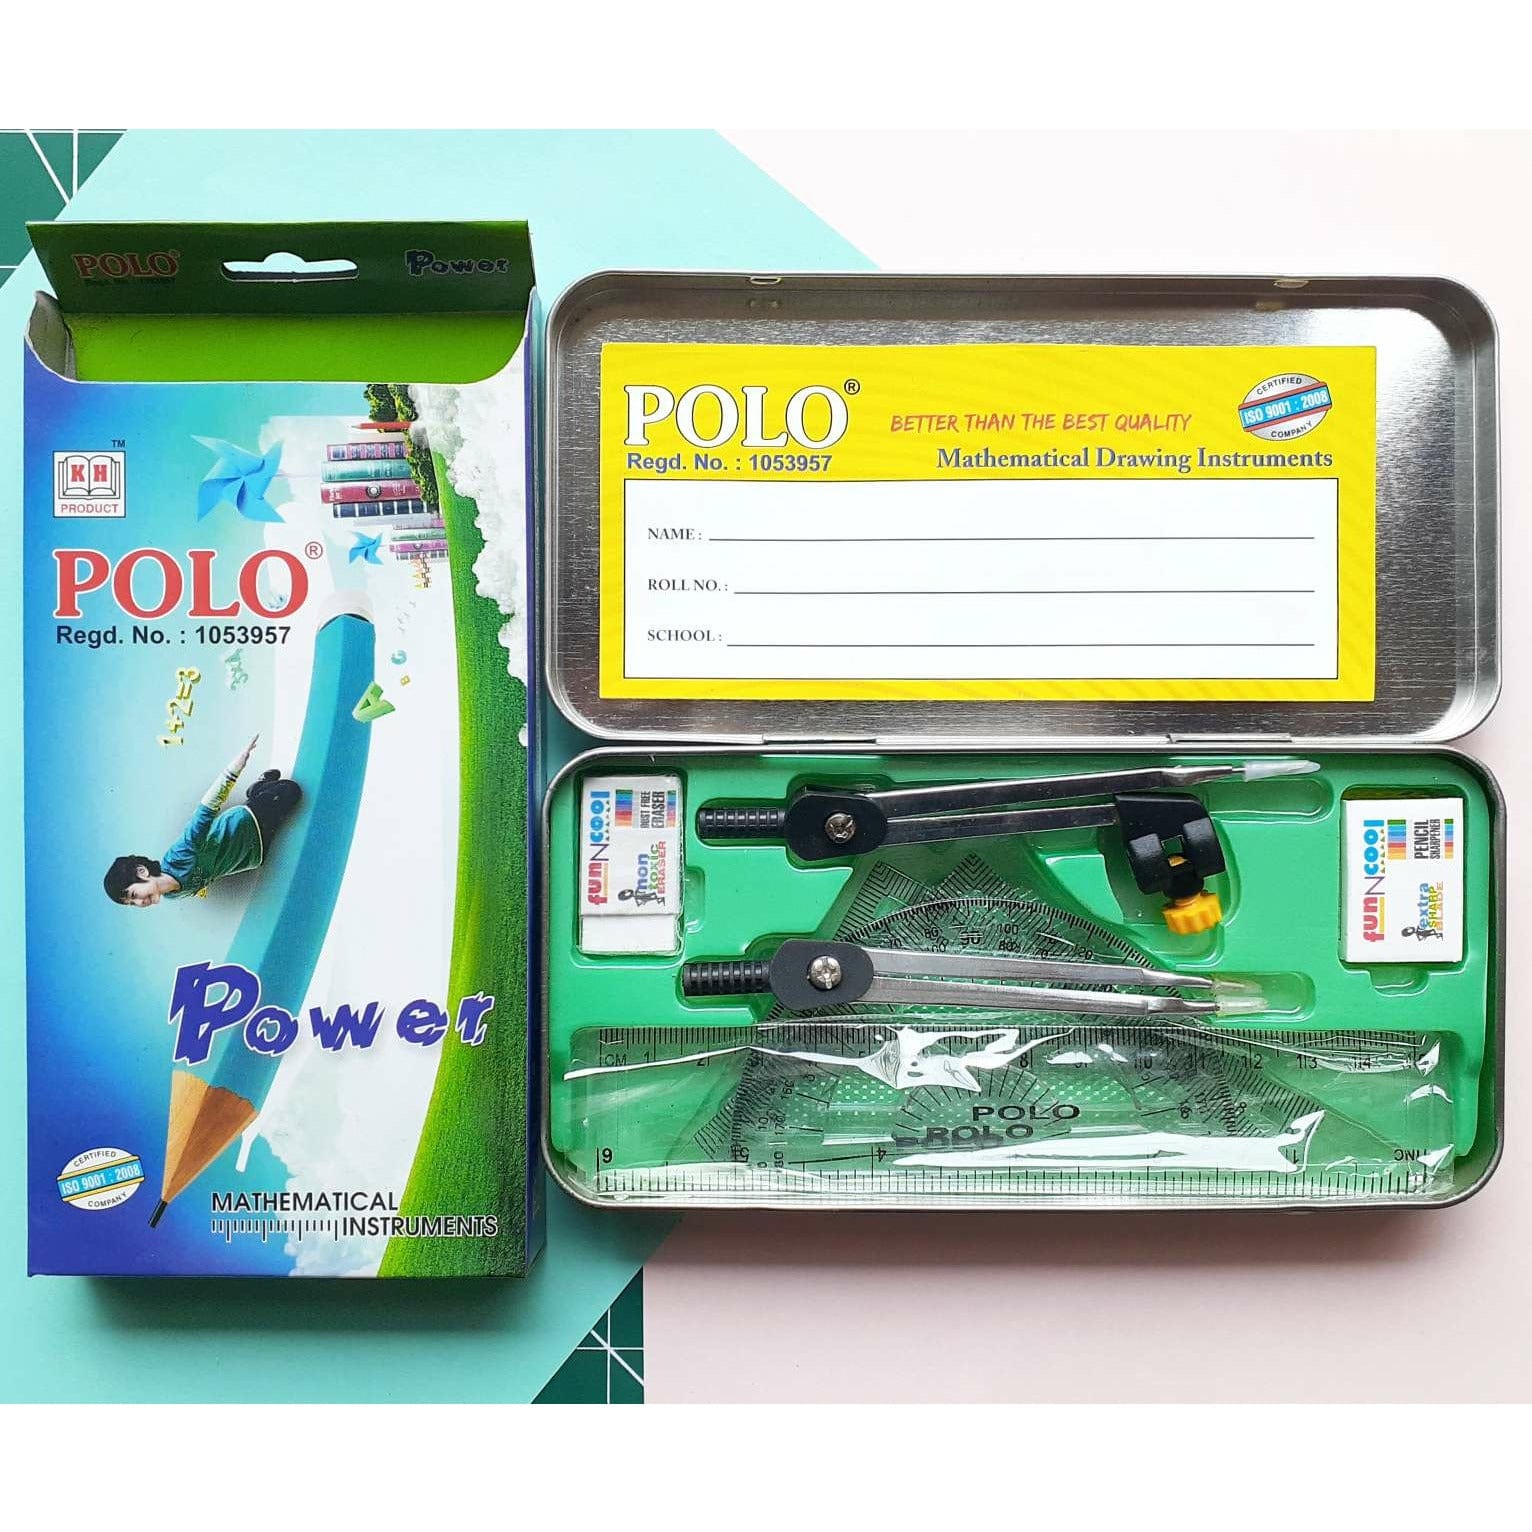 parshwa Traders geometry box with mathematical instruments-polo power